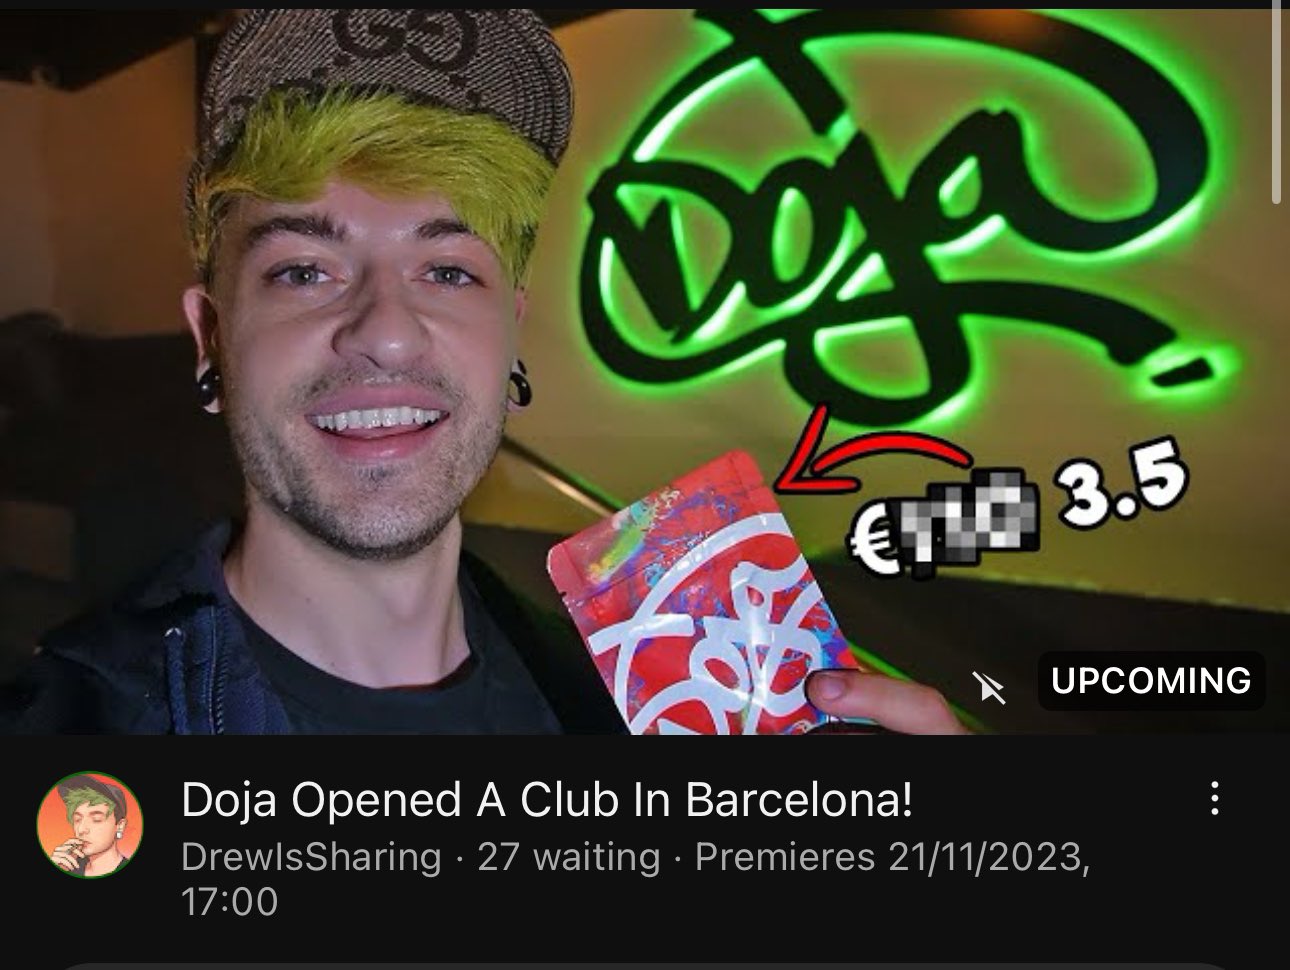 Drewsif Gilchrist on X: NEW  VIDEO! DOJA OPENED A CLUB IN BARCELONA!  Sorry for the long break of full  videos, got 2 more coming this  week :)  Enjoy!  /